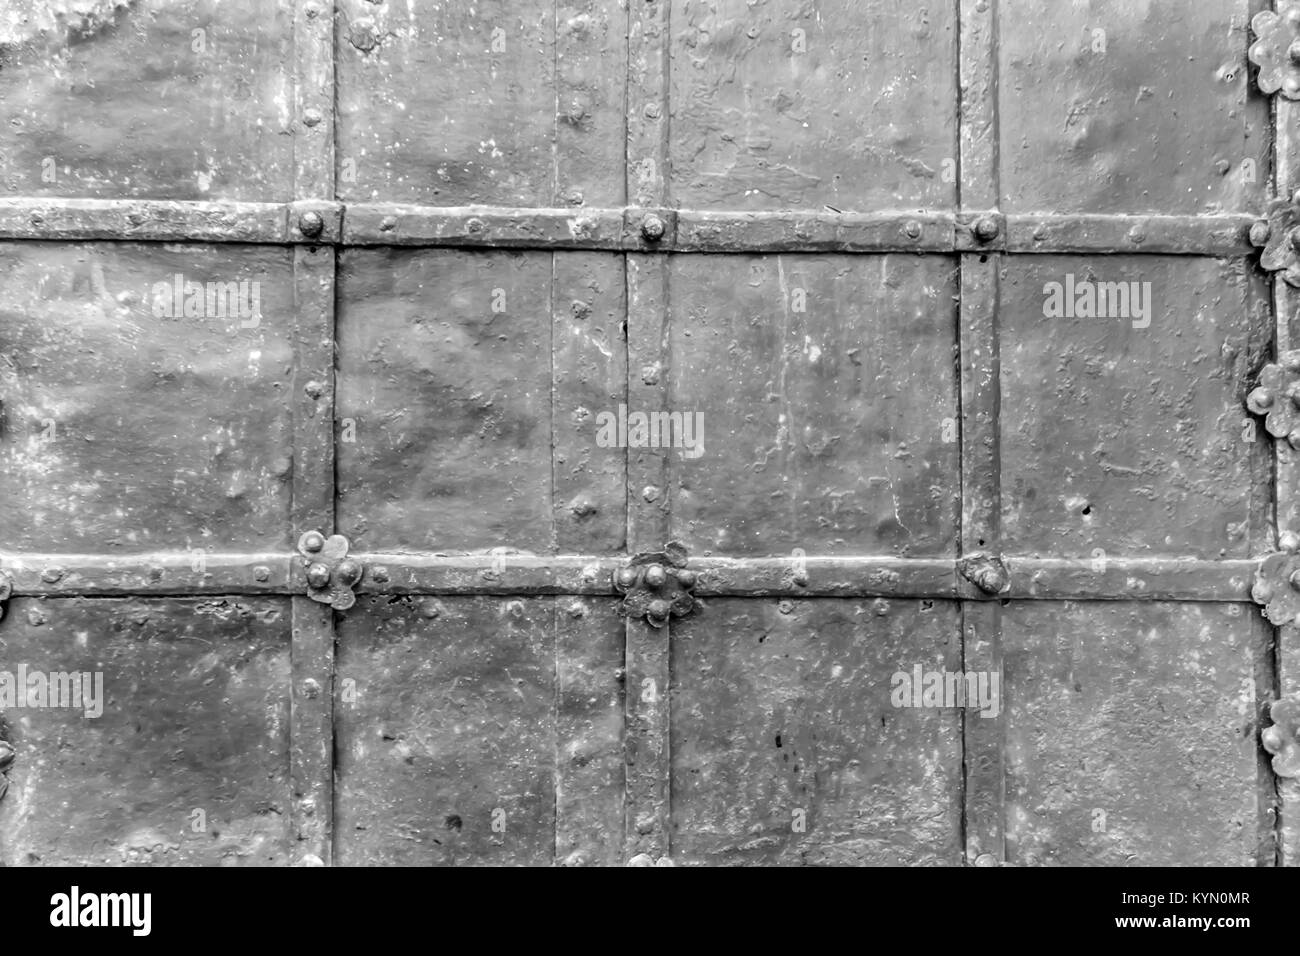 Metal surface divided into squares painted gray Stock Photo